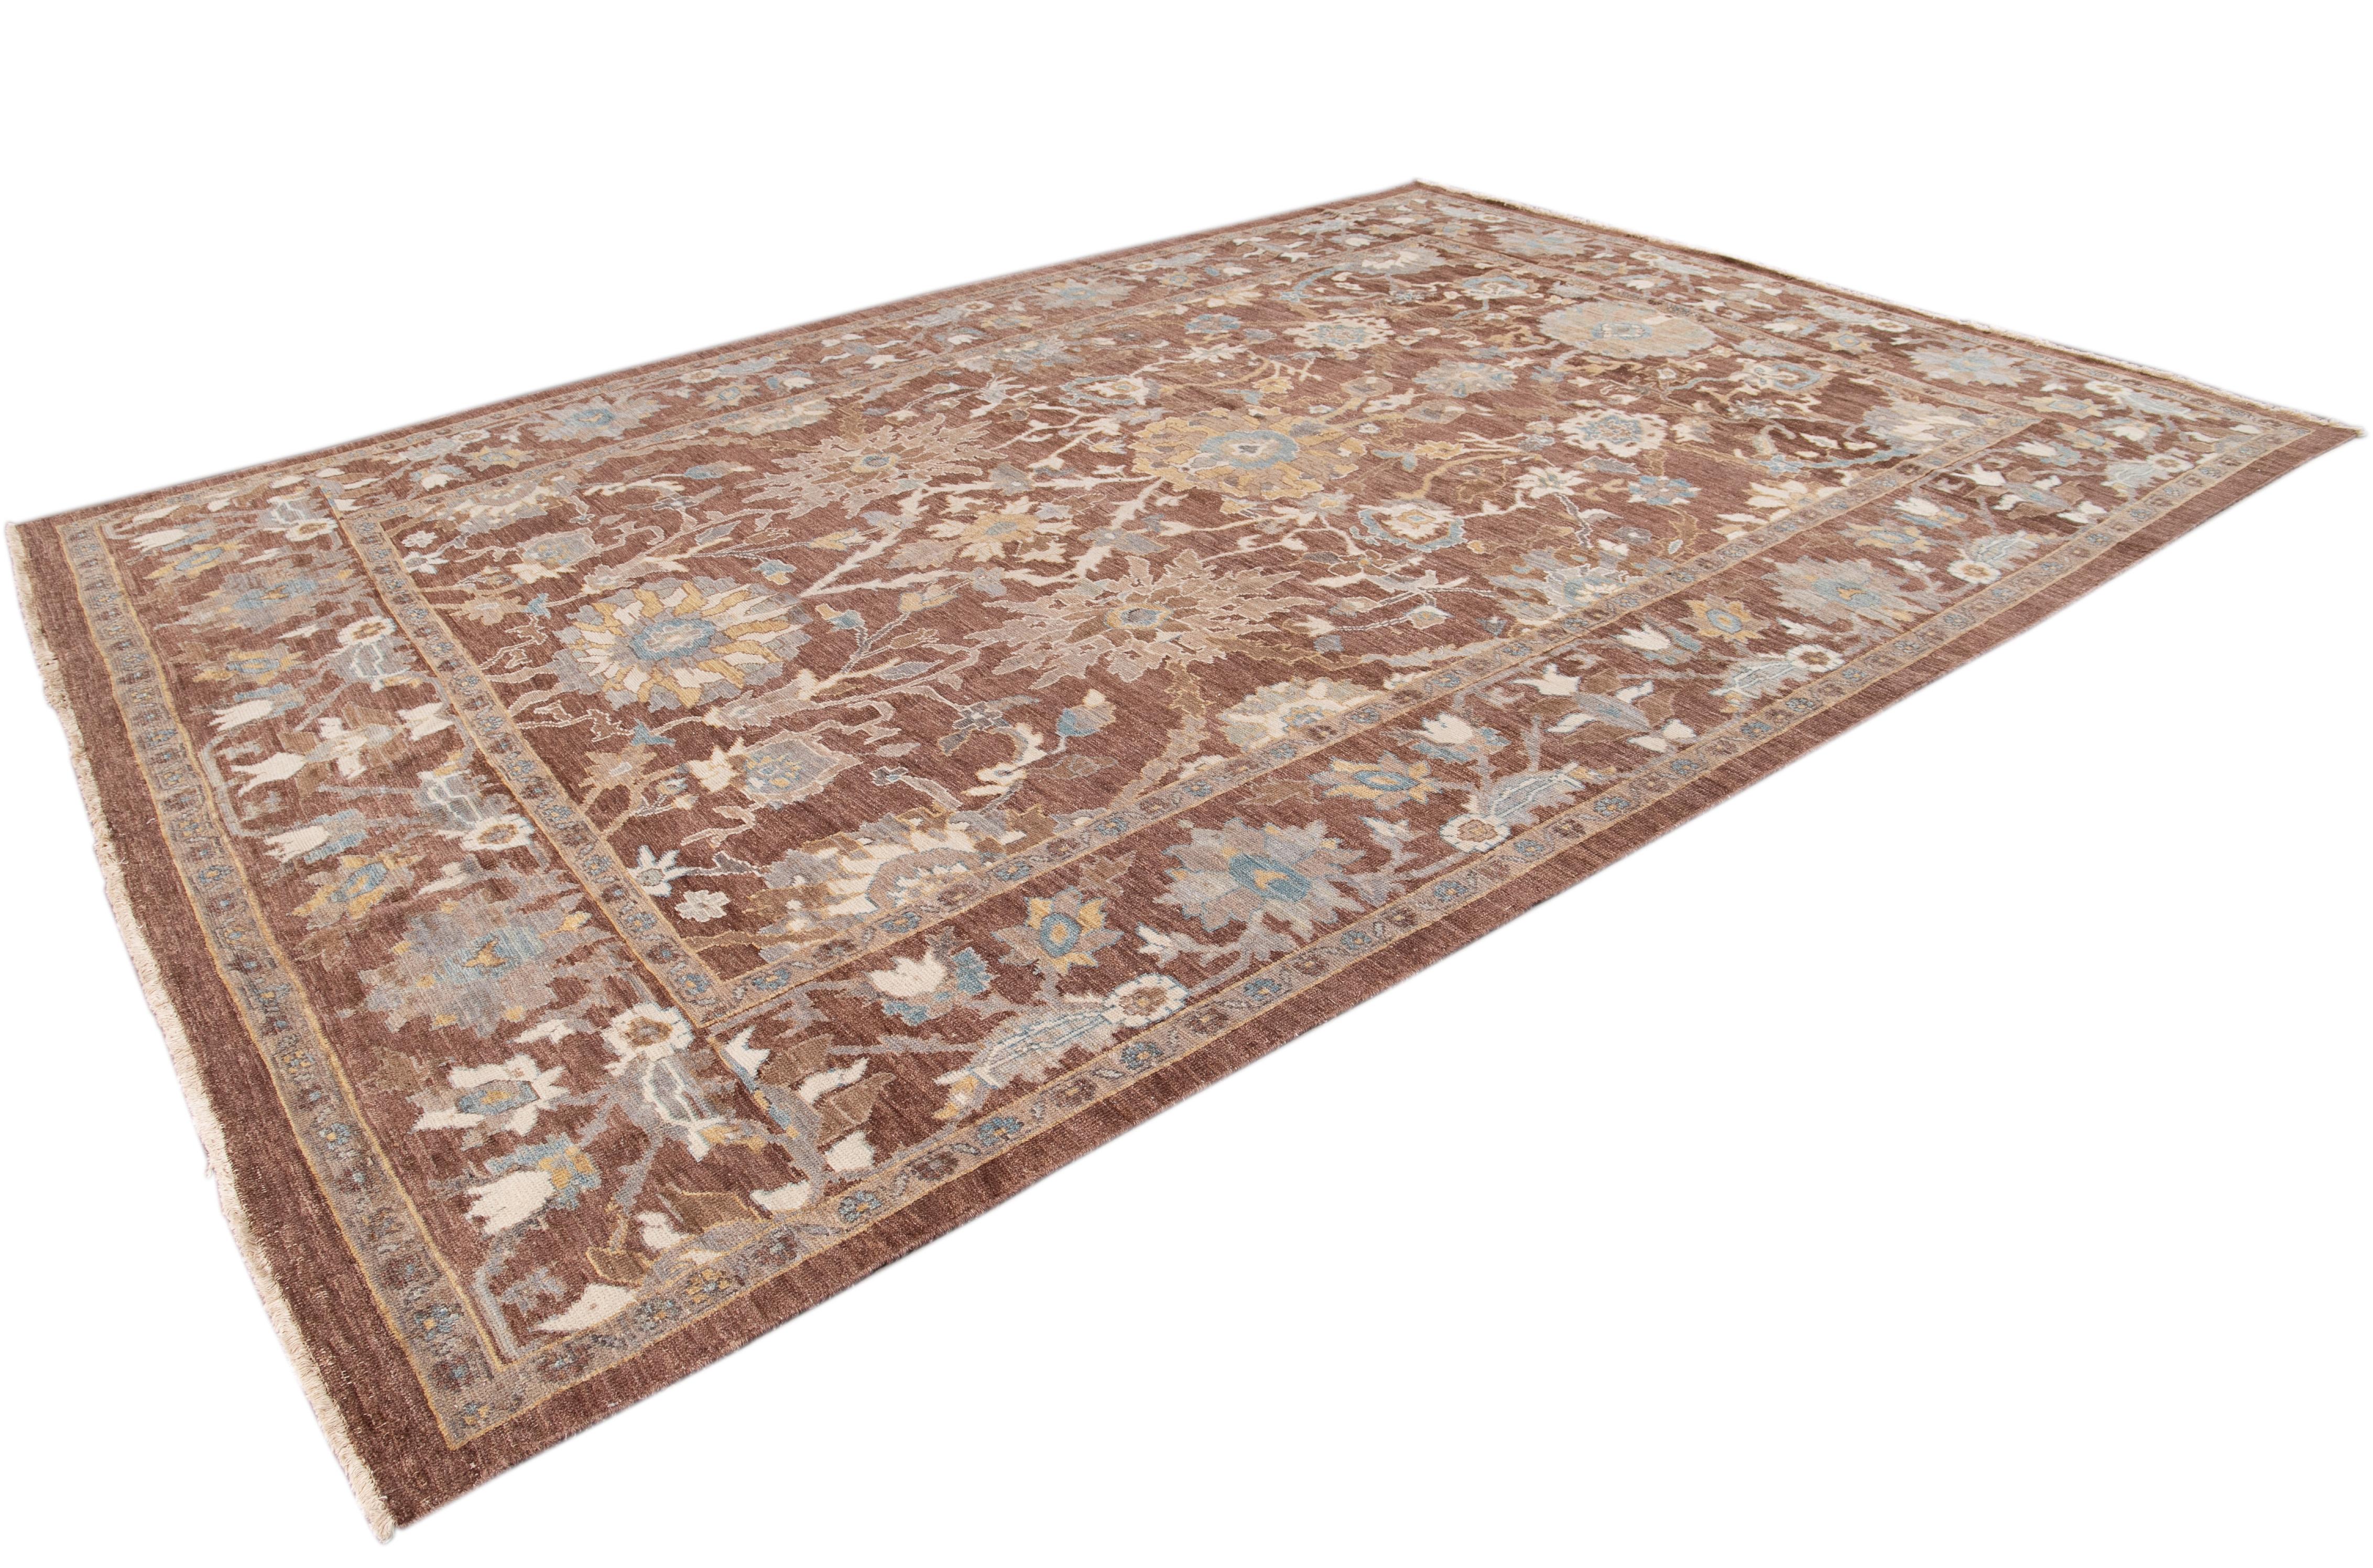 Beautiful 21st century contemporary Persian Sultanabad rug, with a brown field, ivory, tan and blue accents in an all-over floral design.
This rug measures 9' 10